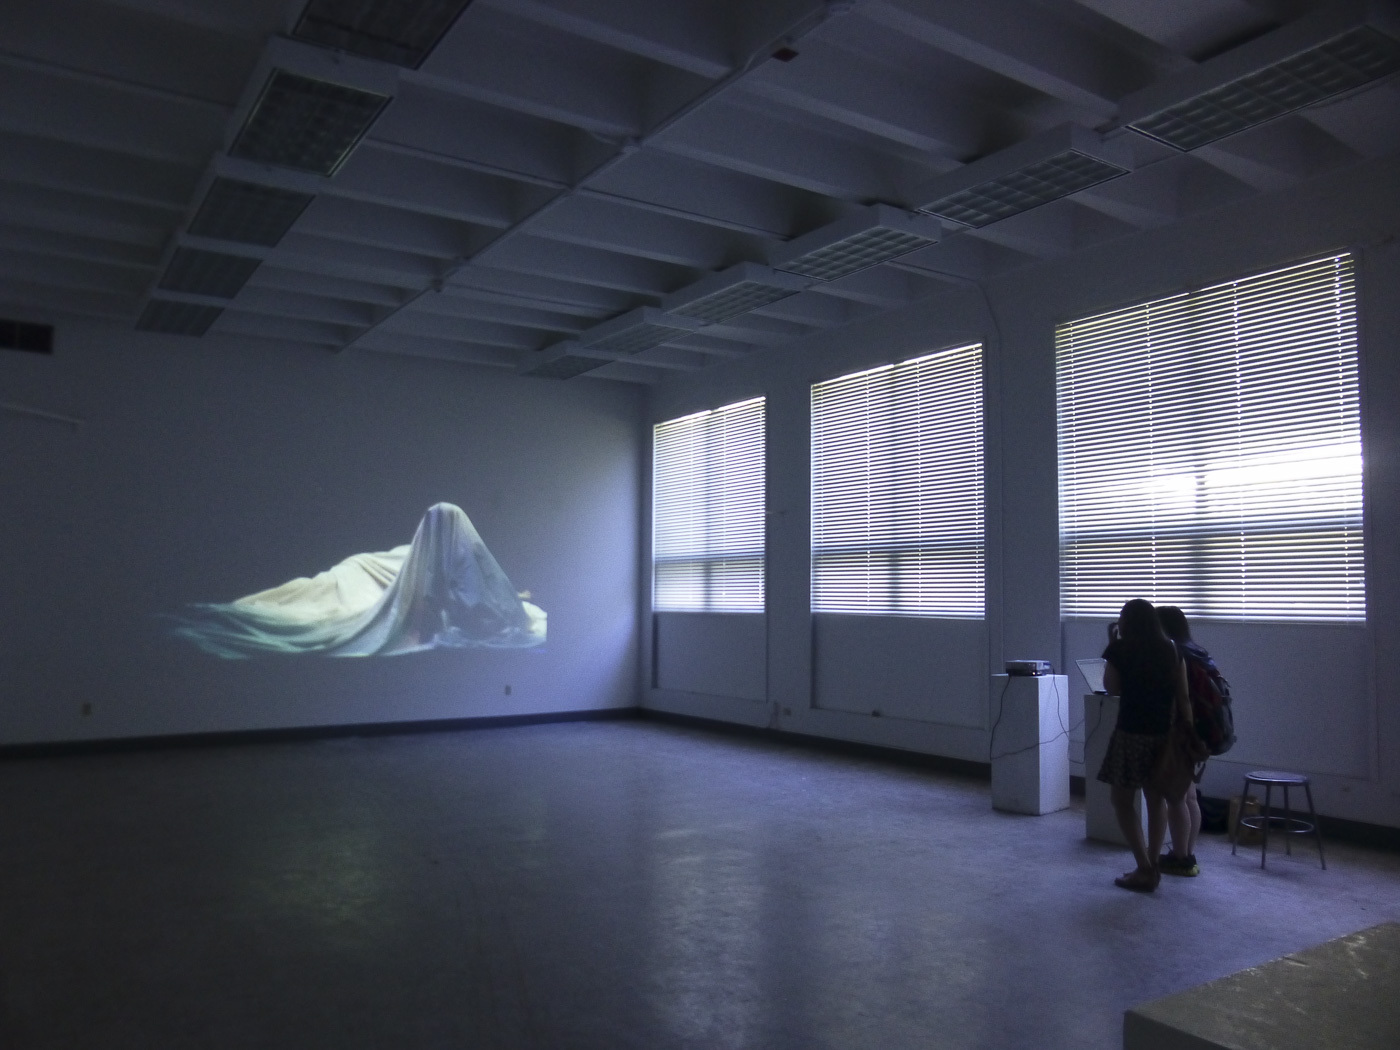 two people stand at one end of a large empty room while a video projection of a figure underneath a large sheet of fabric is displayed on the opposite wall